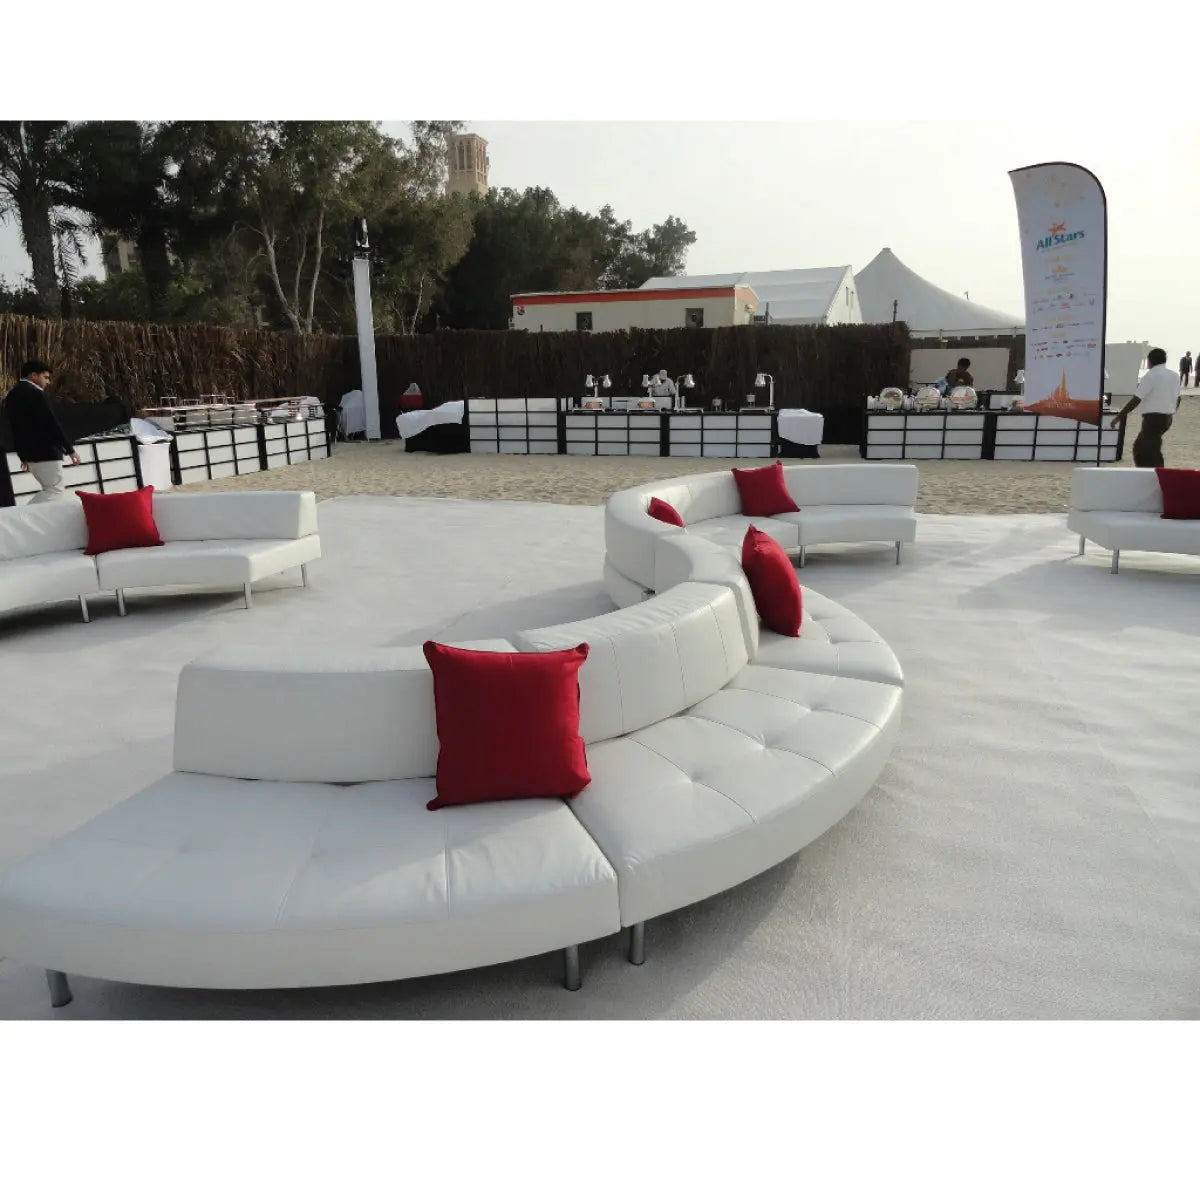 Endless 14 seater serpentine sofa with low back Desert River Rentals